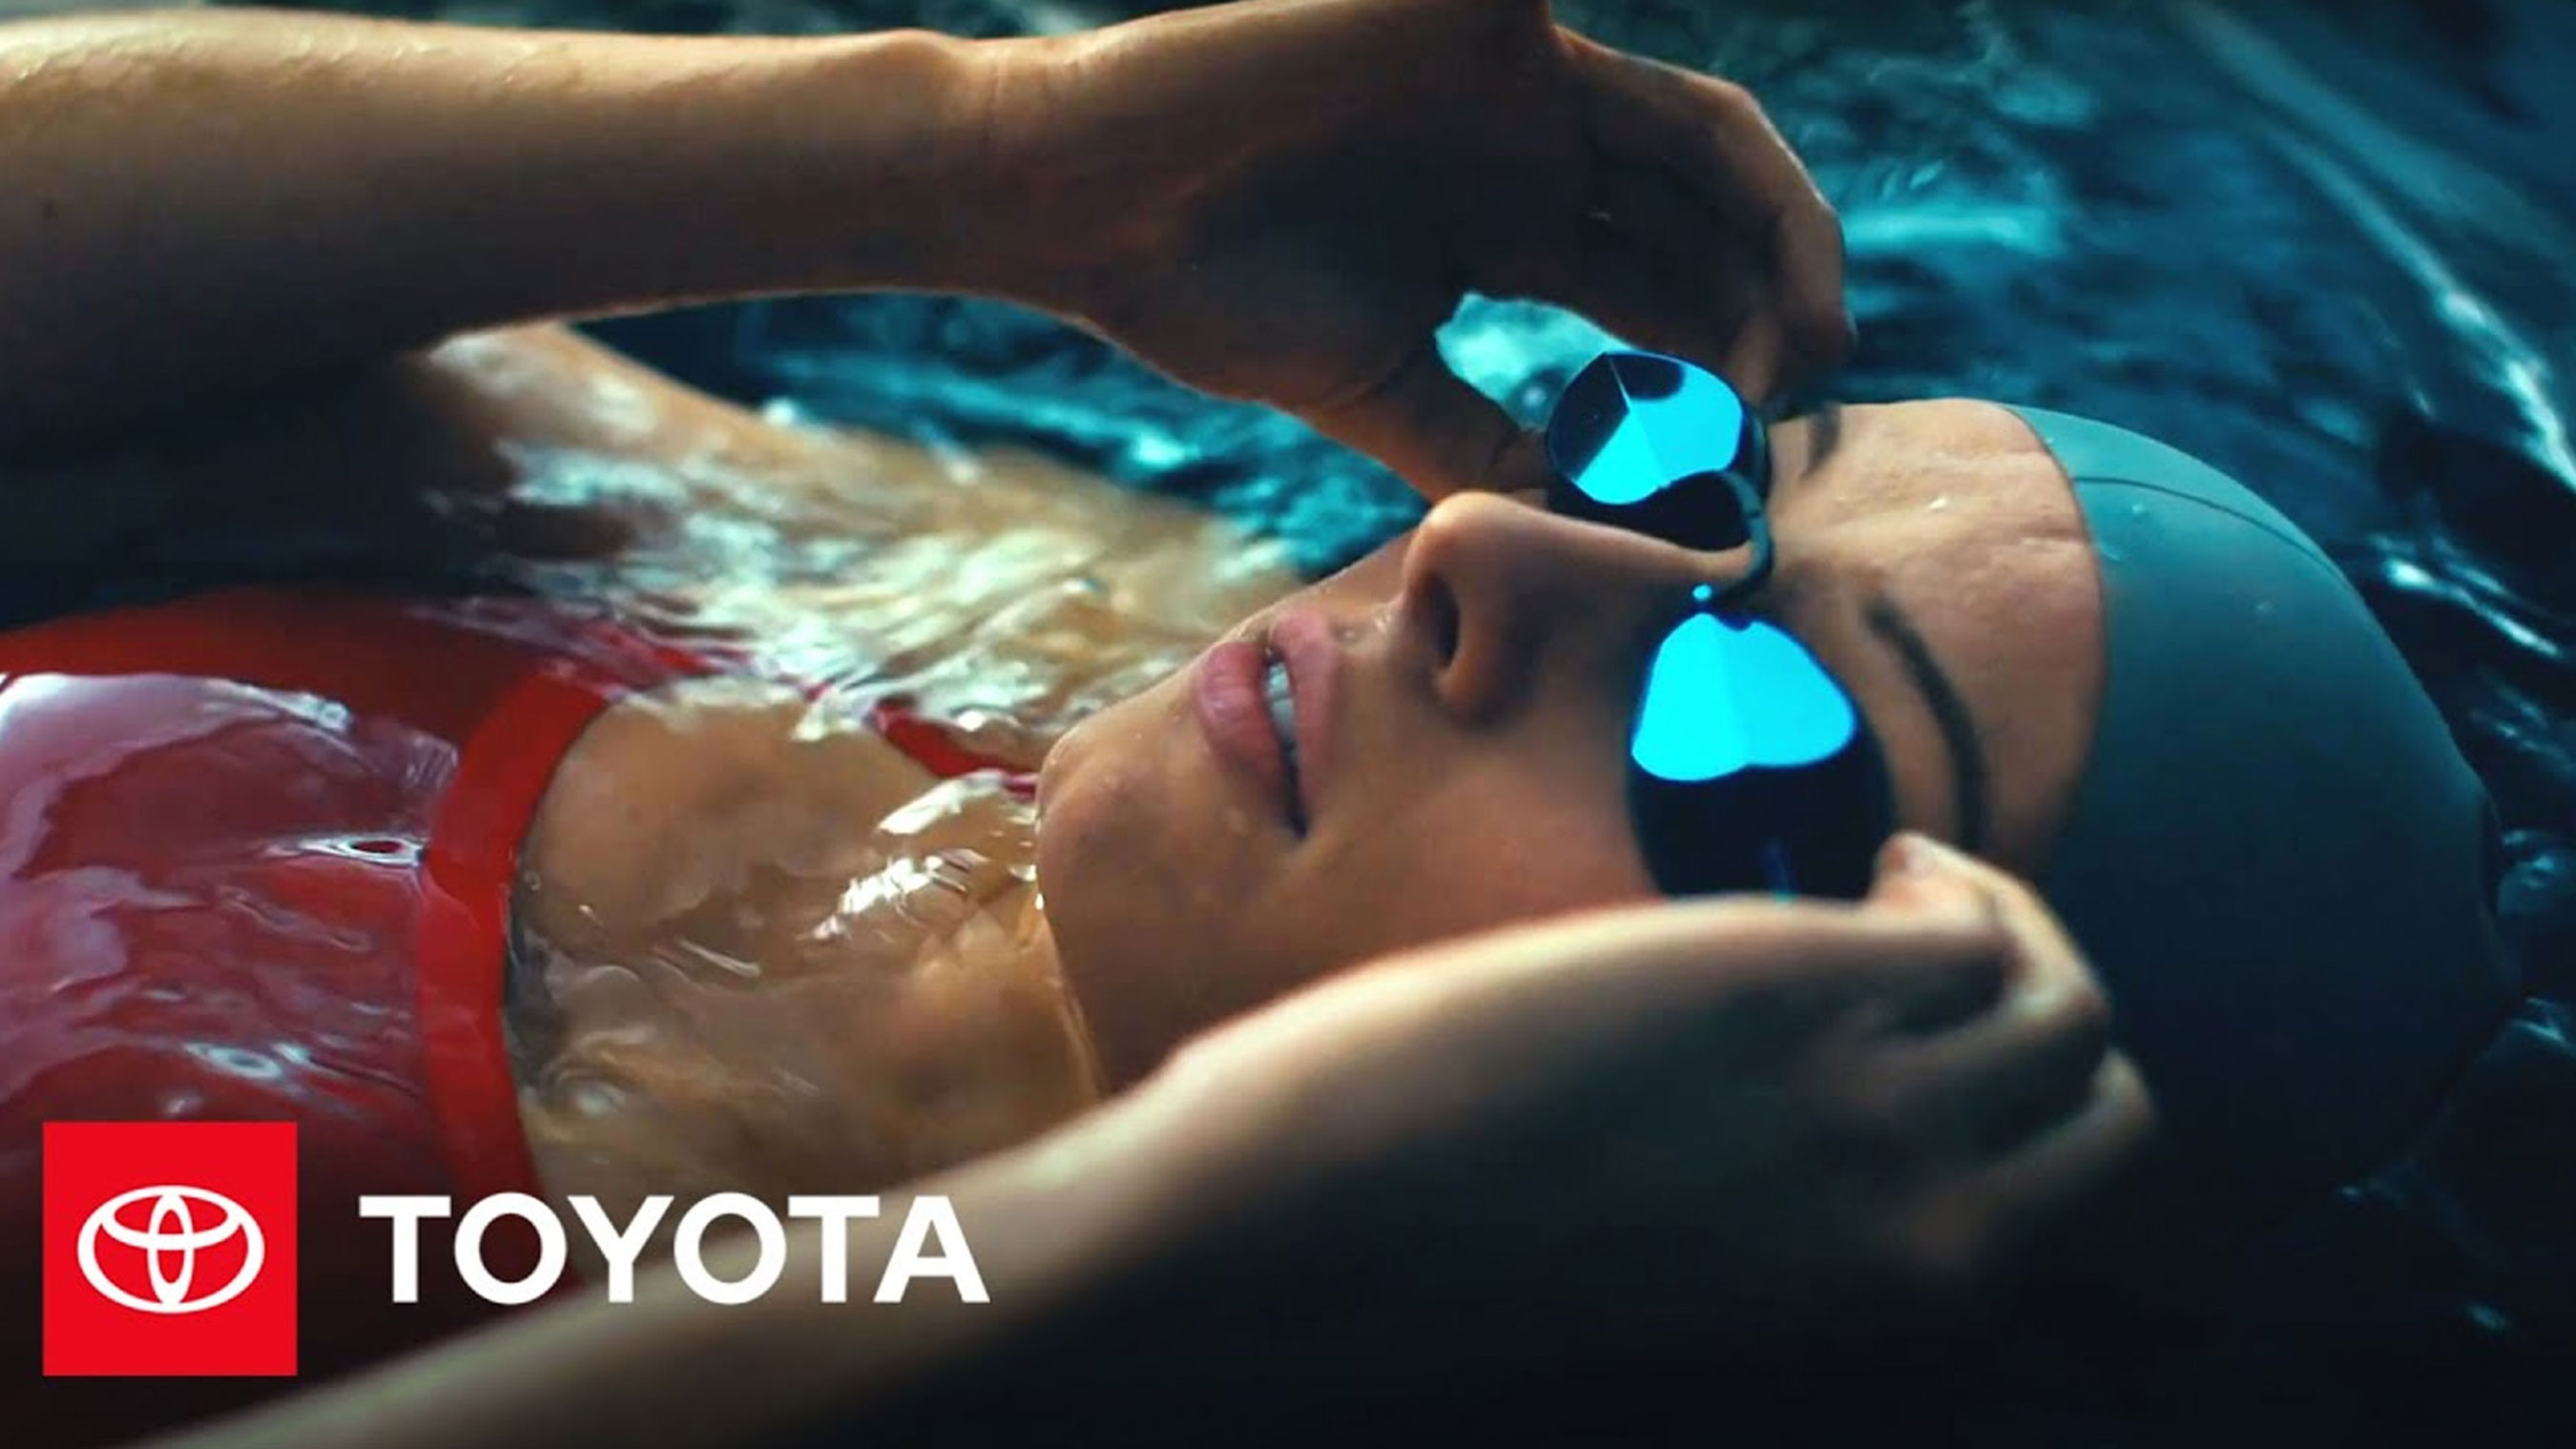 Toyota’s Big Game spot “Upstream,” was created by Saatchi & Saatchi in partnership with Dentsu.